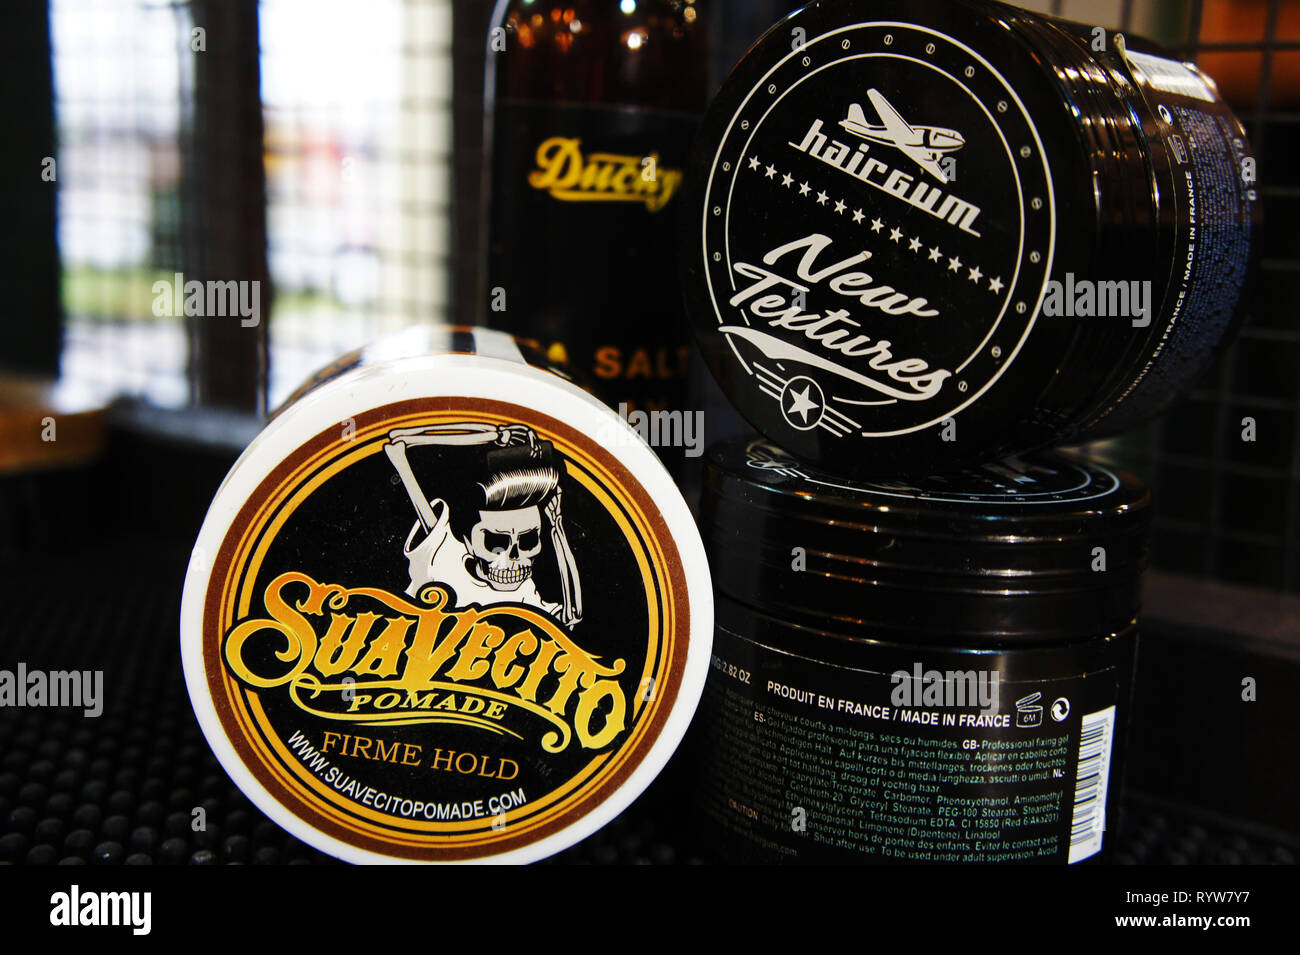 pomade strong firme hold. trendy barbershop styling. gel for male styling - SuaVecito, hairgum, ducky. Stock Photo